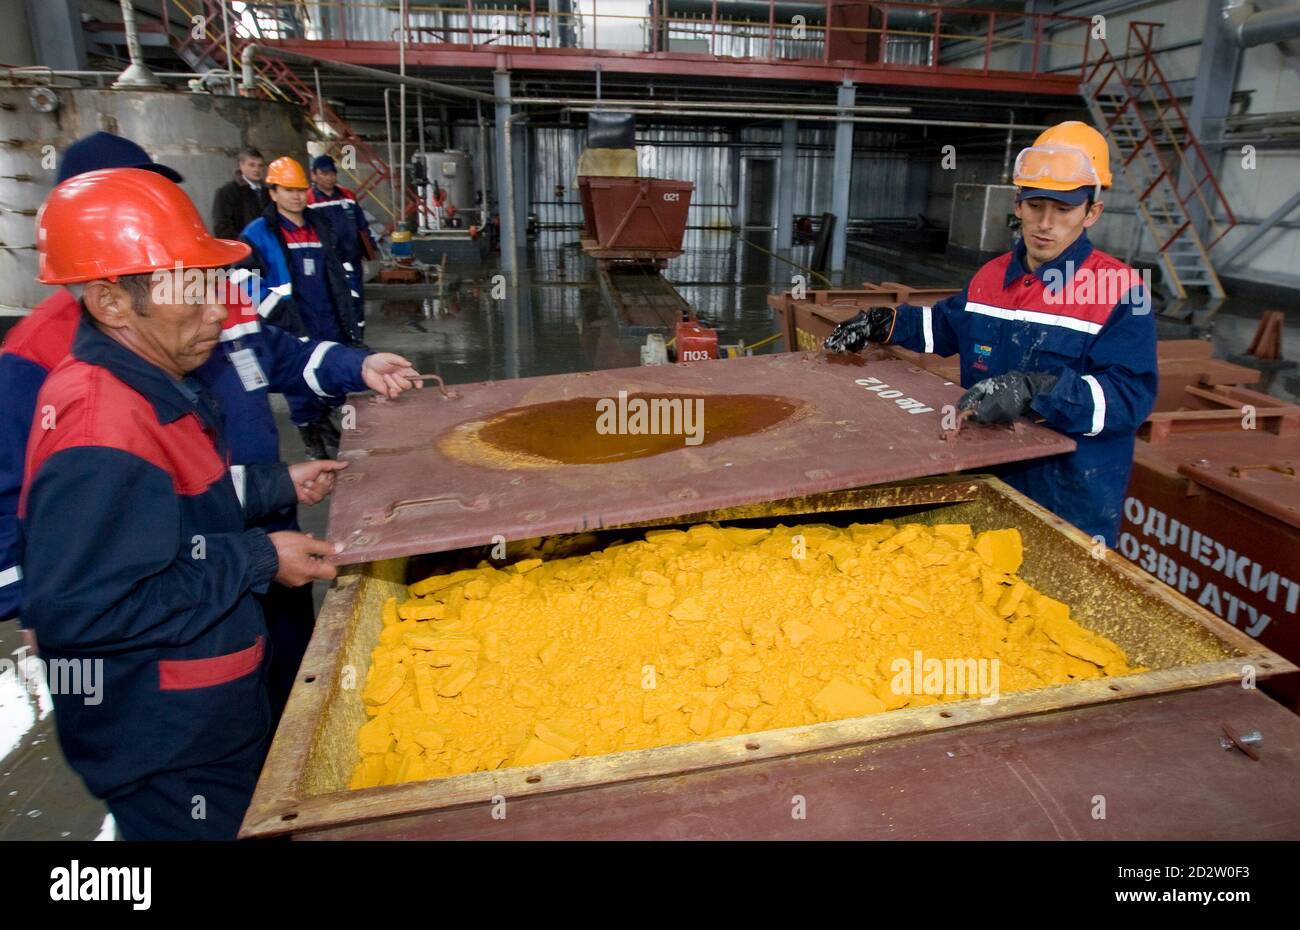 Workers close a container of uranium oxide after the opening of the Khorasan-1 uranium mine in southern Kazakhstan April 24, 2009. Japan opened the major uranium mine in Kazakhstan on Friday, gaining access to alternative energy supplies from resource-rich Central Asia.   REUTERS/Shamil Zhumatov (KAZAKHSTAN POLITICS ENERGY) Stock Photo